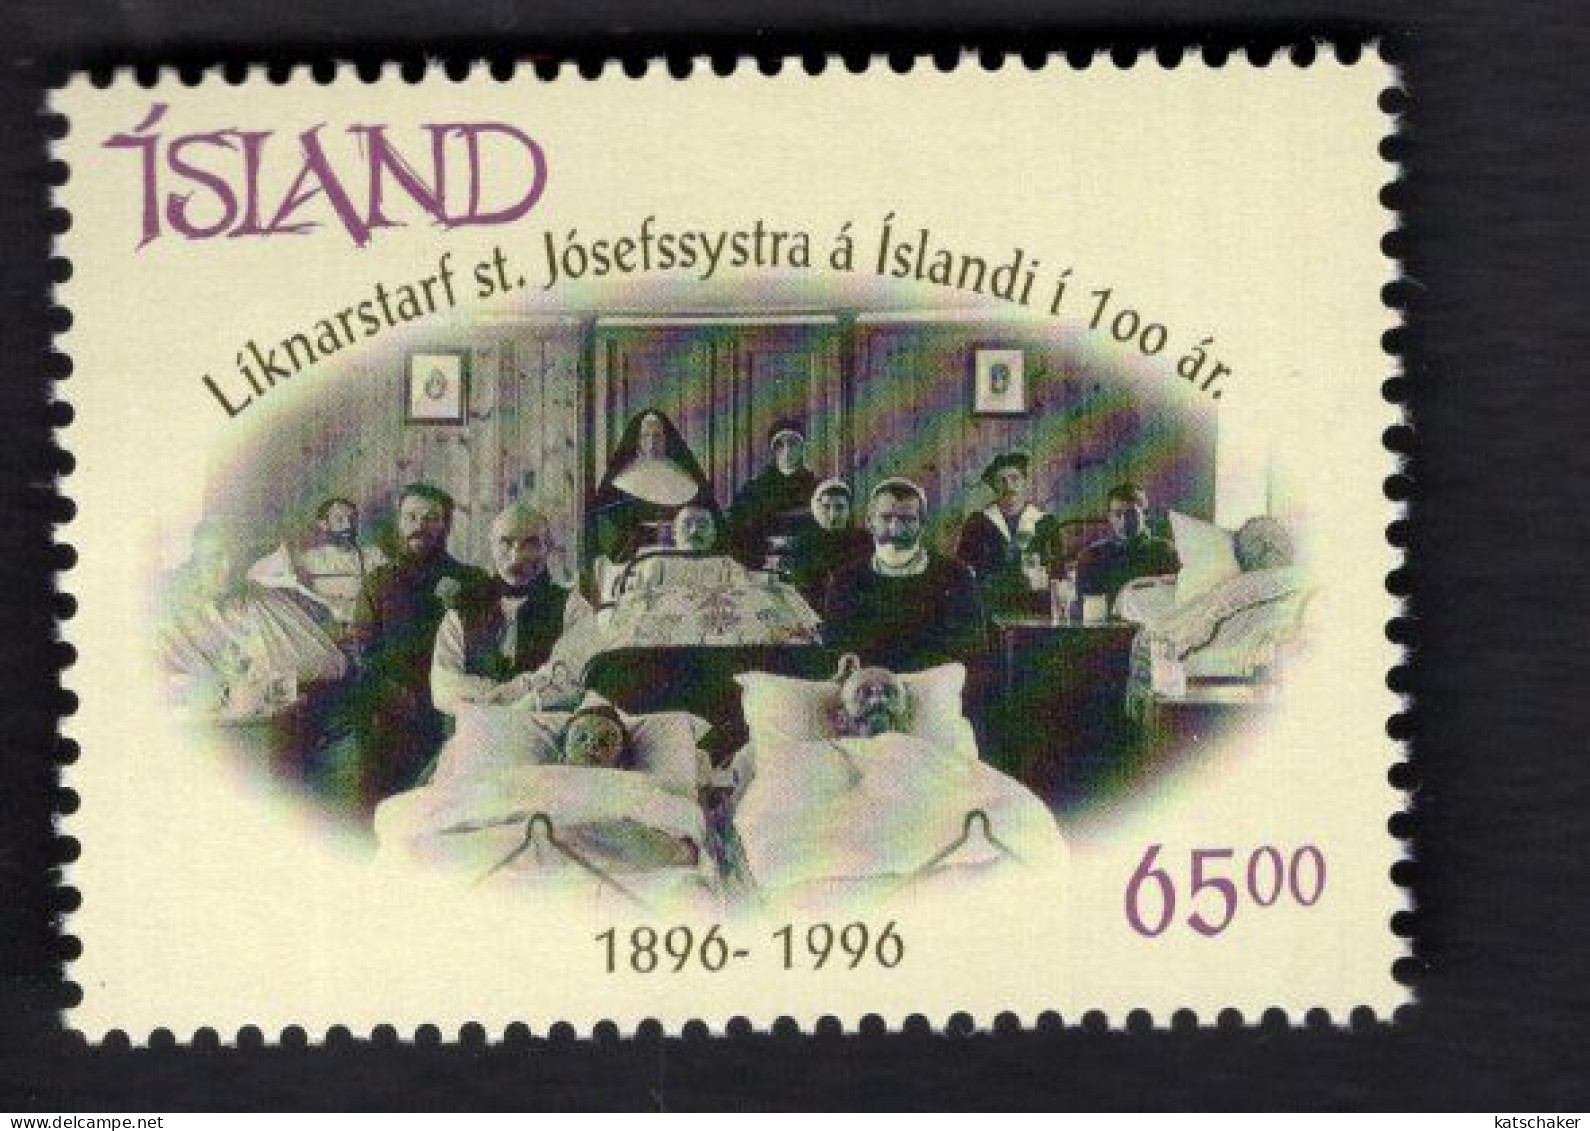 2022465560 1996 SCOTT 828 (XX)  POSTFRIS MINT NEVER HINGED - ORDER OF THE SISTERS OF ST. JOSEPH IN ICELAND - CENT. - Unused Stamps